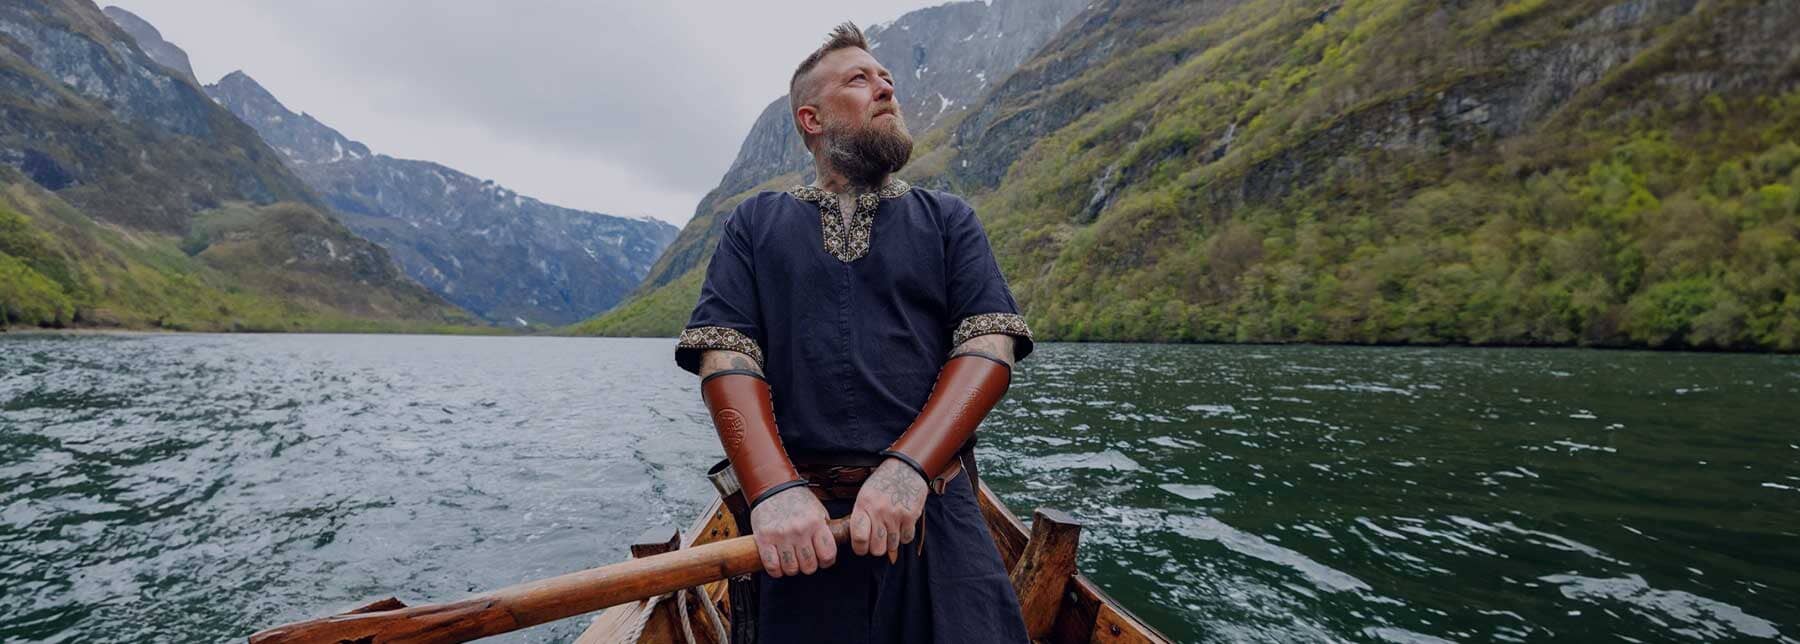 Viking Tunic “Eric the Scout”